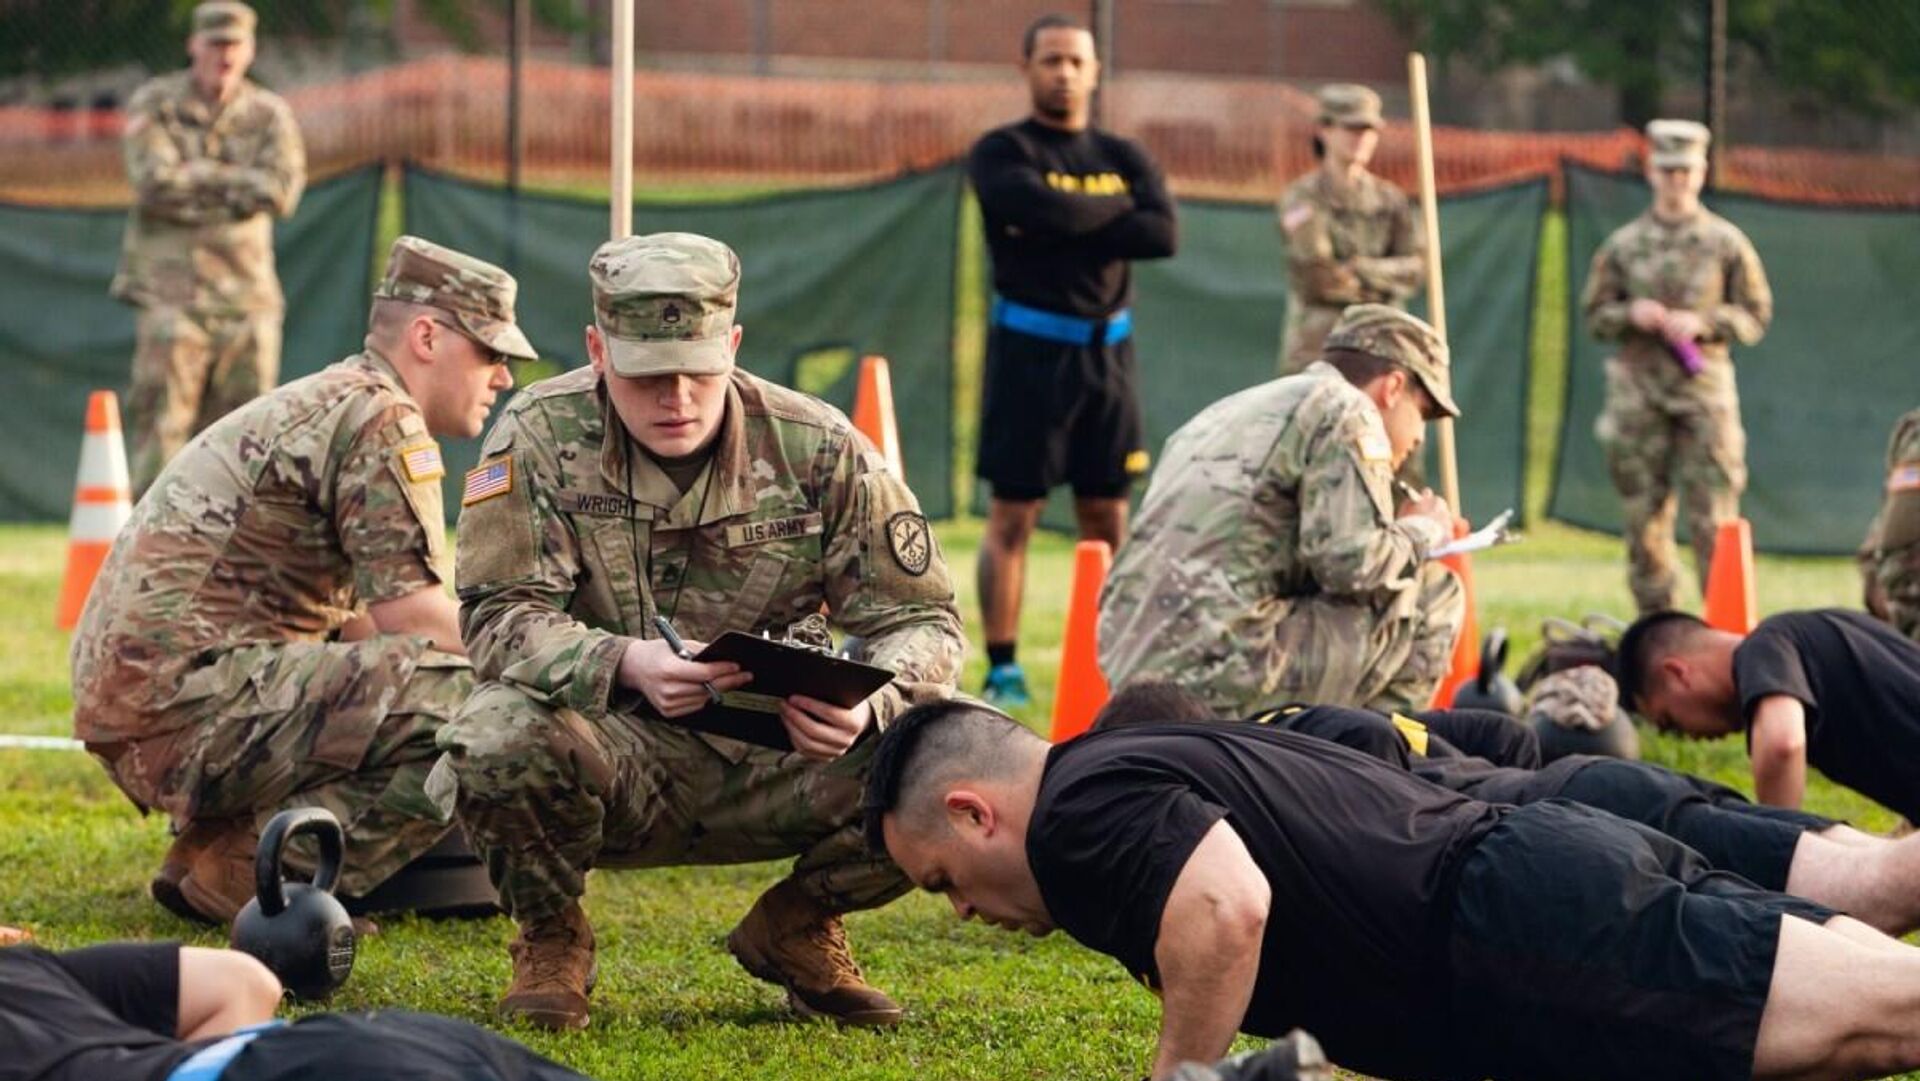 U.S. Army Staff Sgt. Gabriel Wright, a signals intelligence analyst with the 780th Military intelligence Brigade, grades the Hand-Release Push-Up event May 17, 2019, as part of Army Combat Fitness Test Level II Grader validation training, held at Fort Meade, Maryland. A mobile training team from Fort Gordon’s Cyber Center of Excellence NCO Academy in Georgia provided the training by teaching, coaching, and administering the ACFT to 114 NCOs. (U.S. Army Photo by Sgt. 1st Class Osvaldo Equite/Released) (Sgt. 1st Class Osvaldo Equite) - Sputnik International, 1920, 07.05.2022